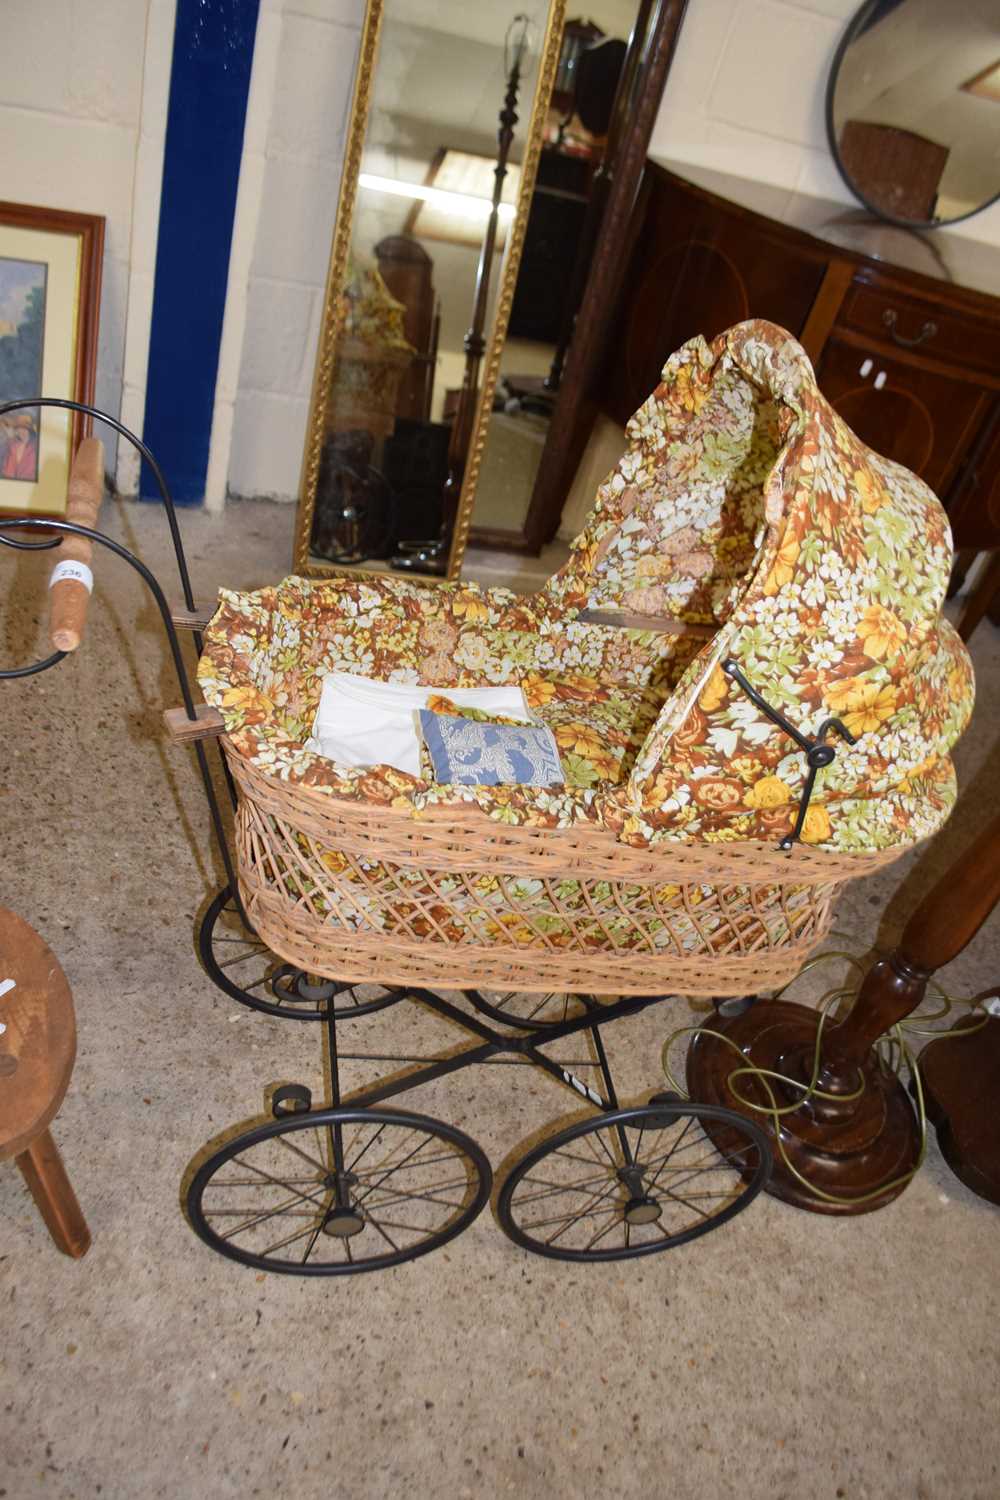 A small metal framed pram with floral fabric hood